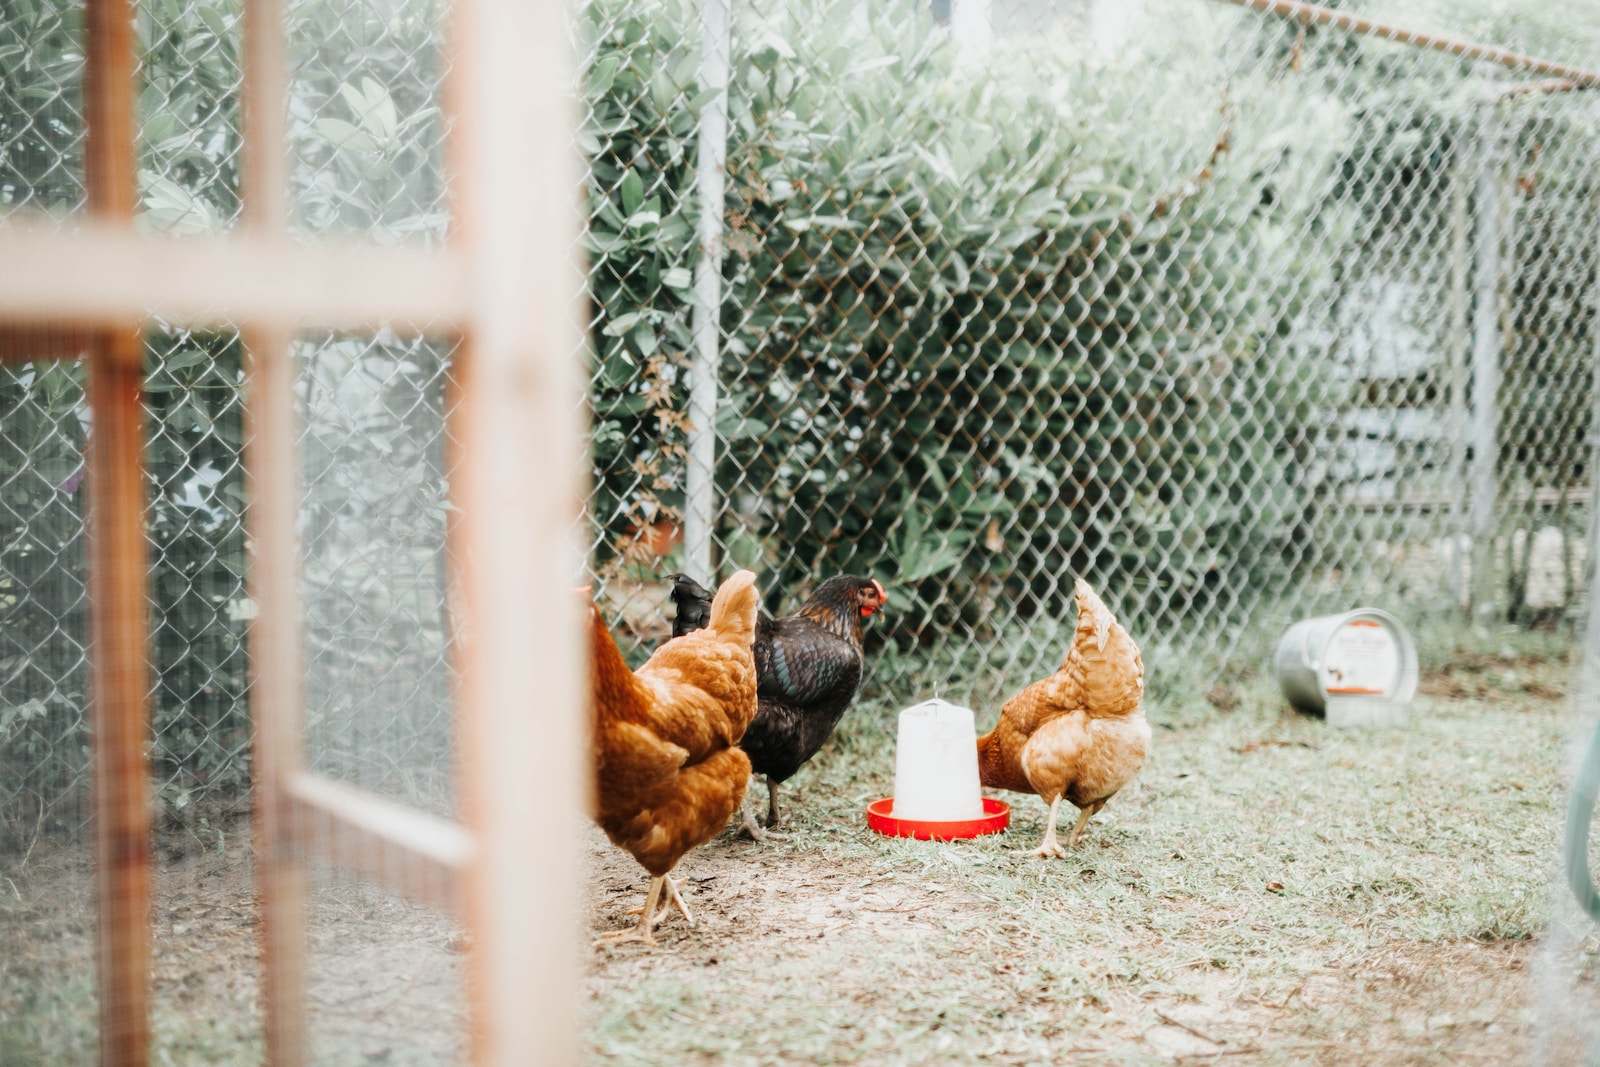 Essential Components Of A Chicken Run